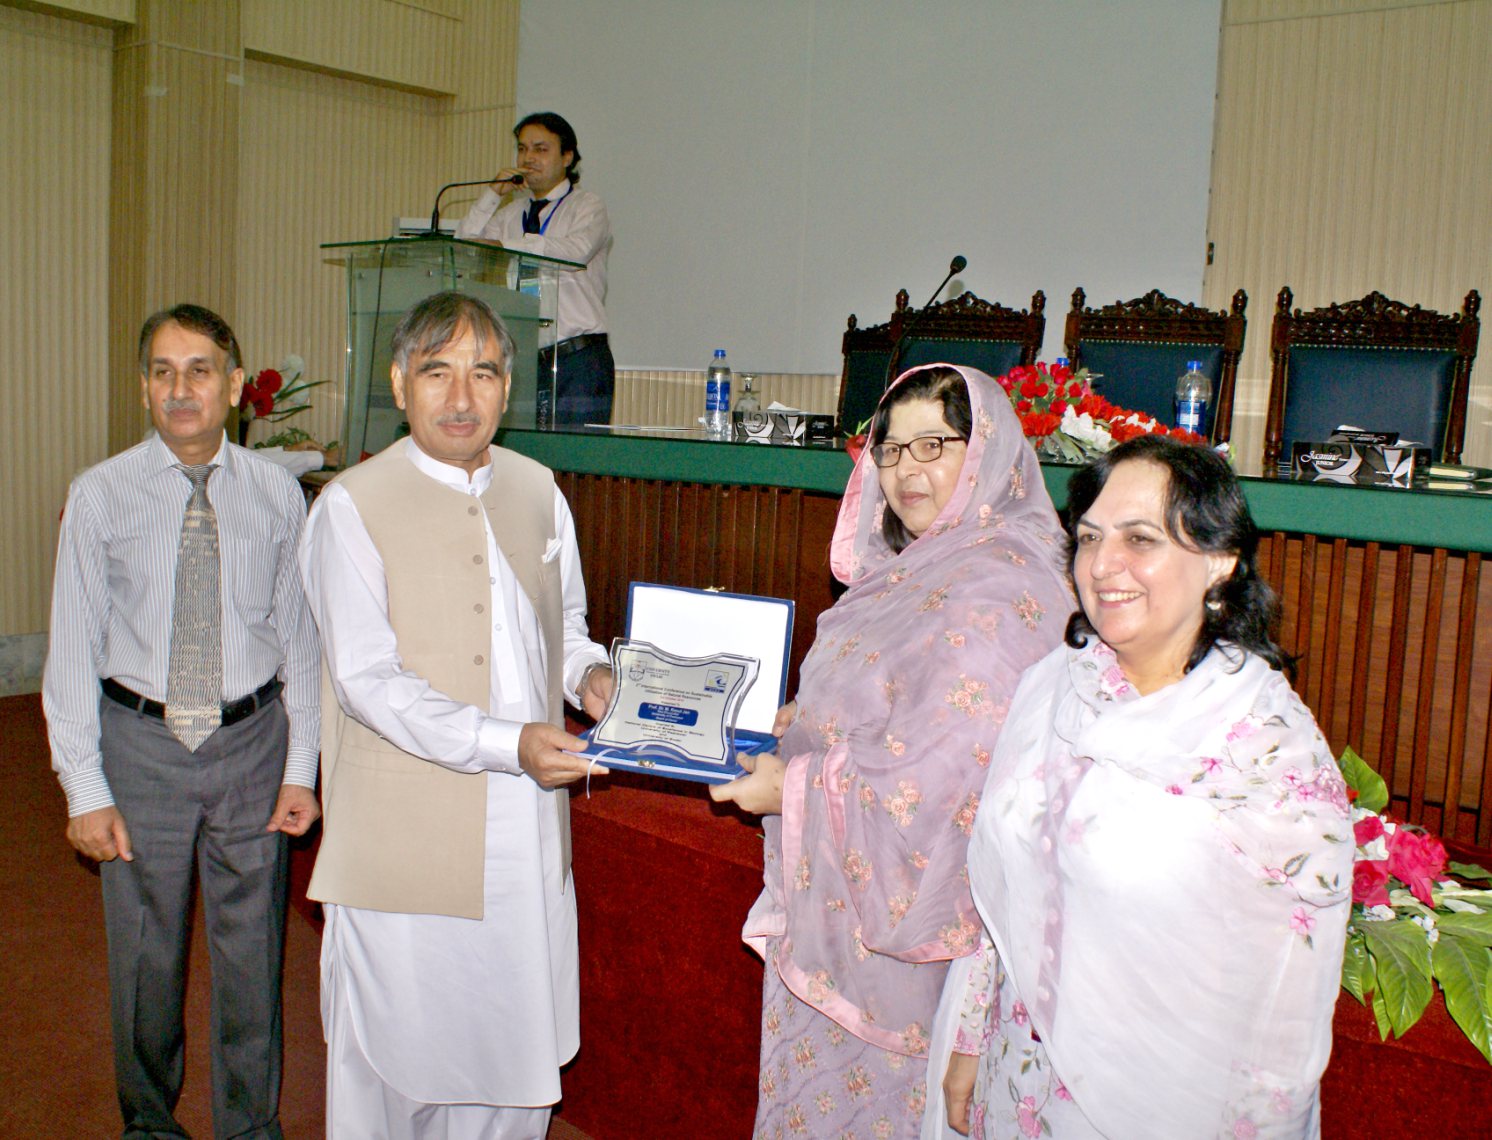 Vice Chancellor UoP Prof. Dr. Muhammad Rasul Jan presenting souvenir to Minister for Labor and Minerals Ms. Aneesa Zeb Tahir kheili at the Intl Conference on sustainable resources at the University of Peshawar